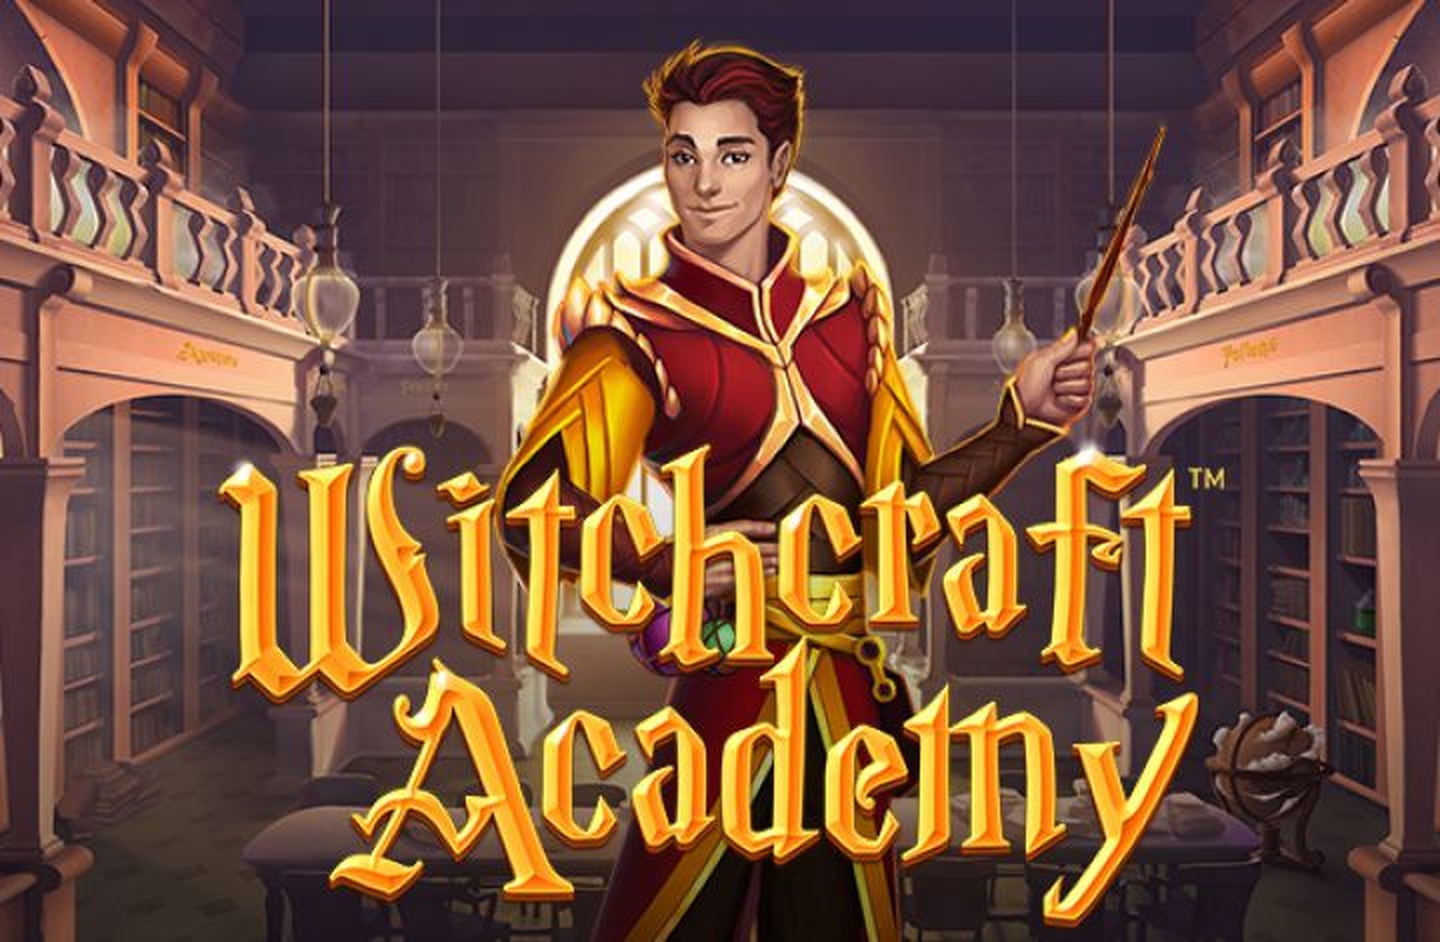 The Witchcraft Academy Online Slot Demo Game by NetEnt